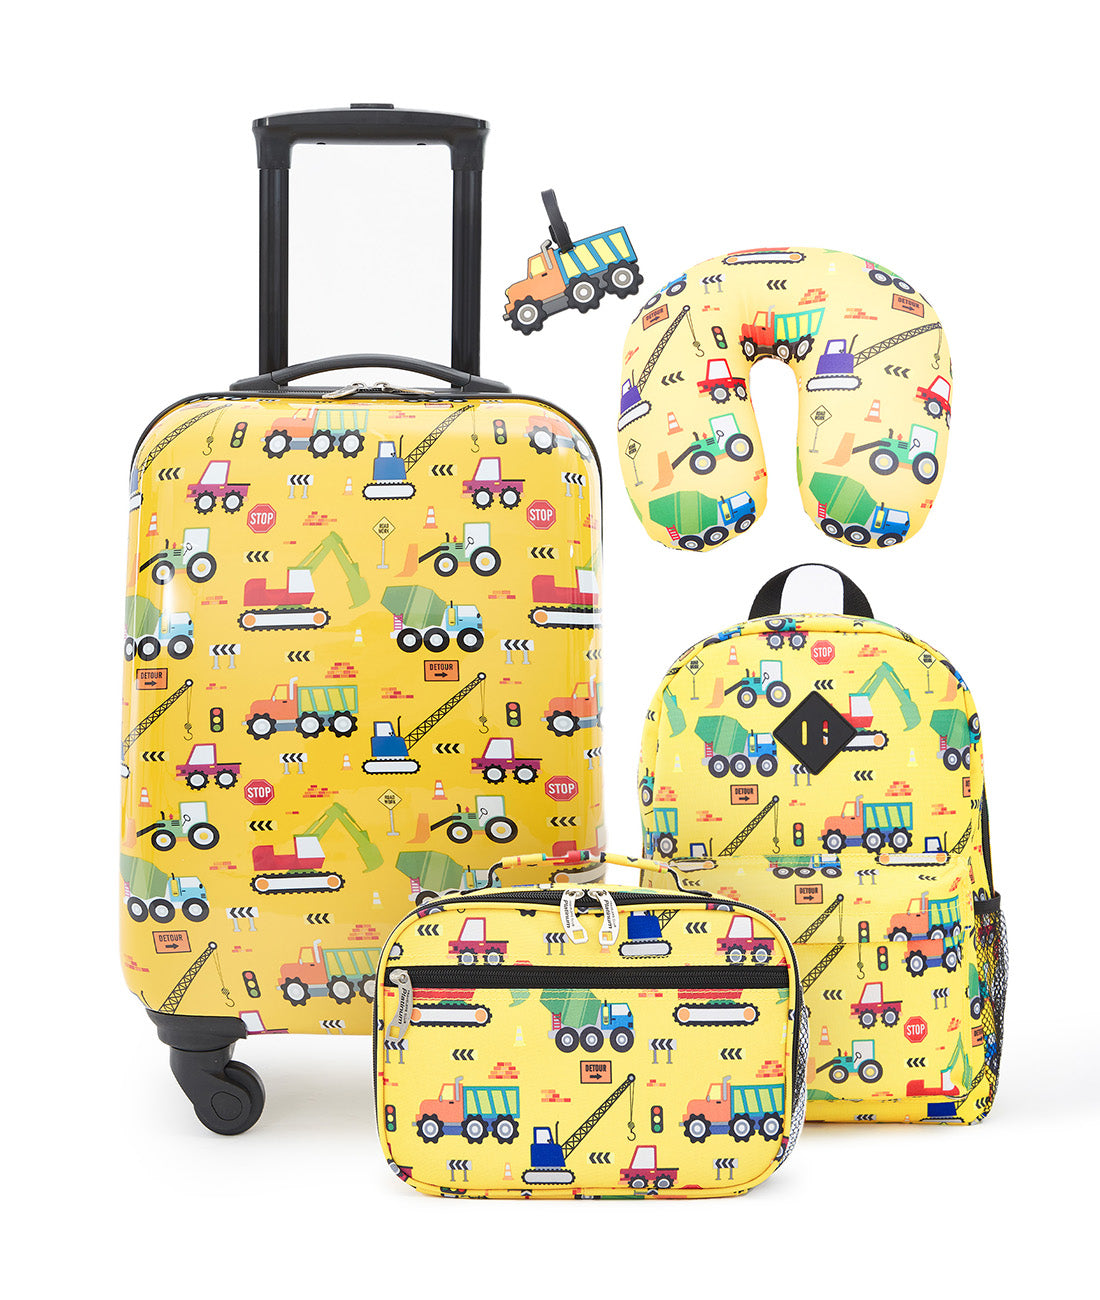 luggage covers.ph, Online Shop